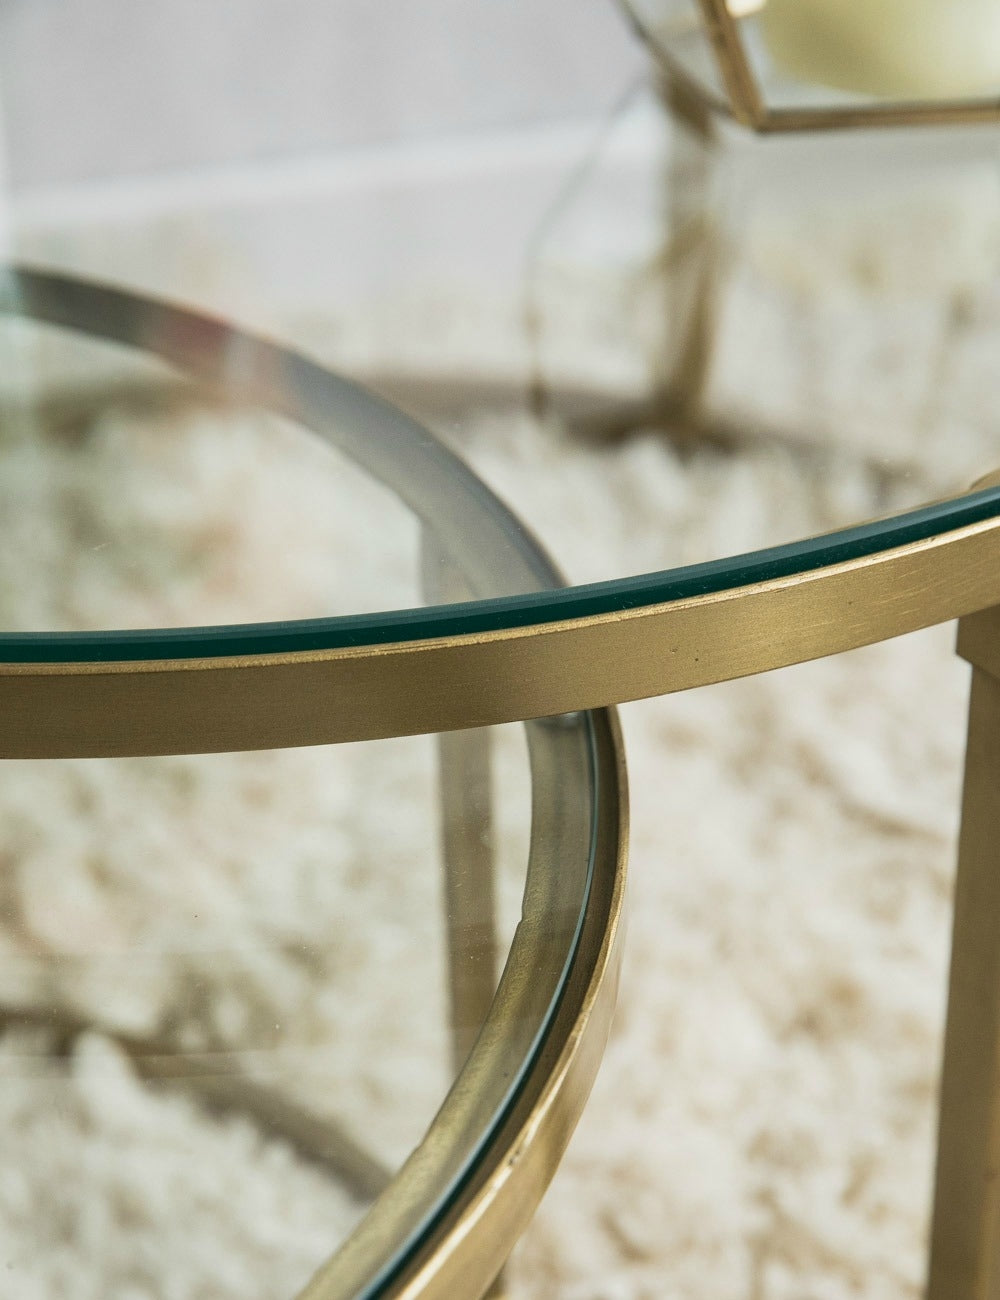 Coco Nesting Round Glass Coffee Tables